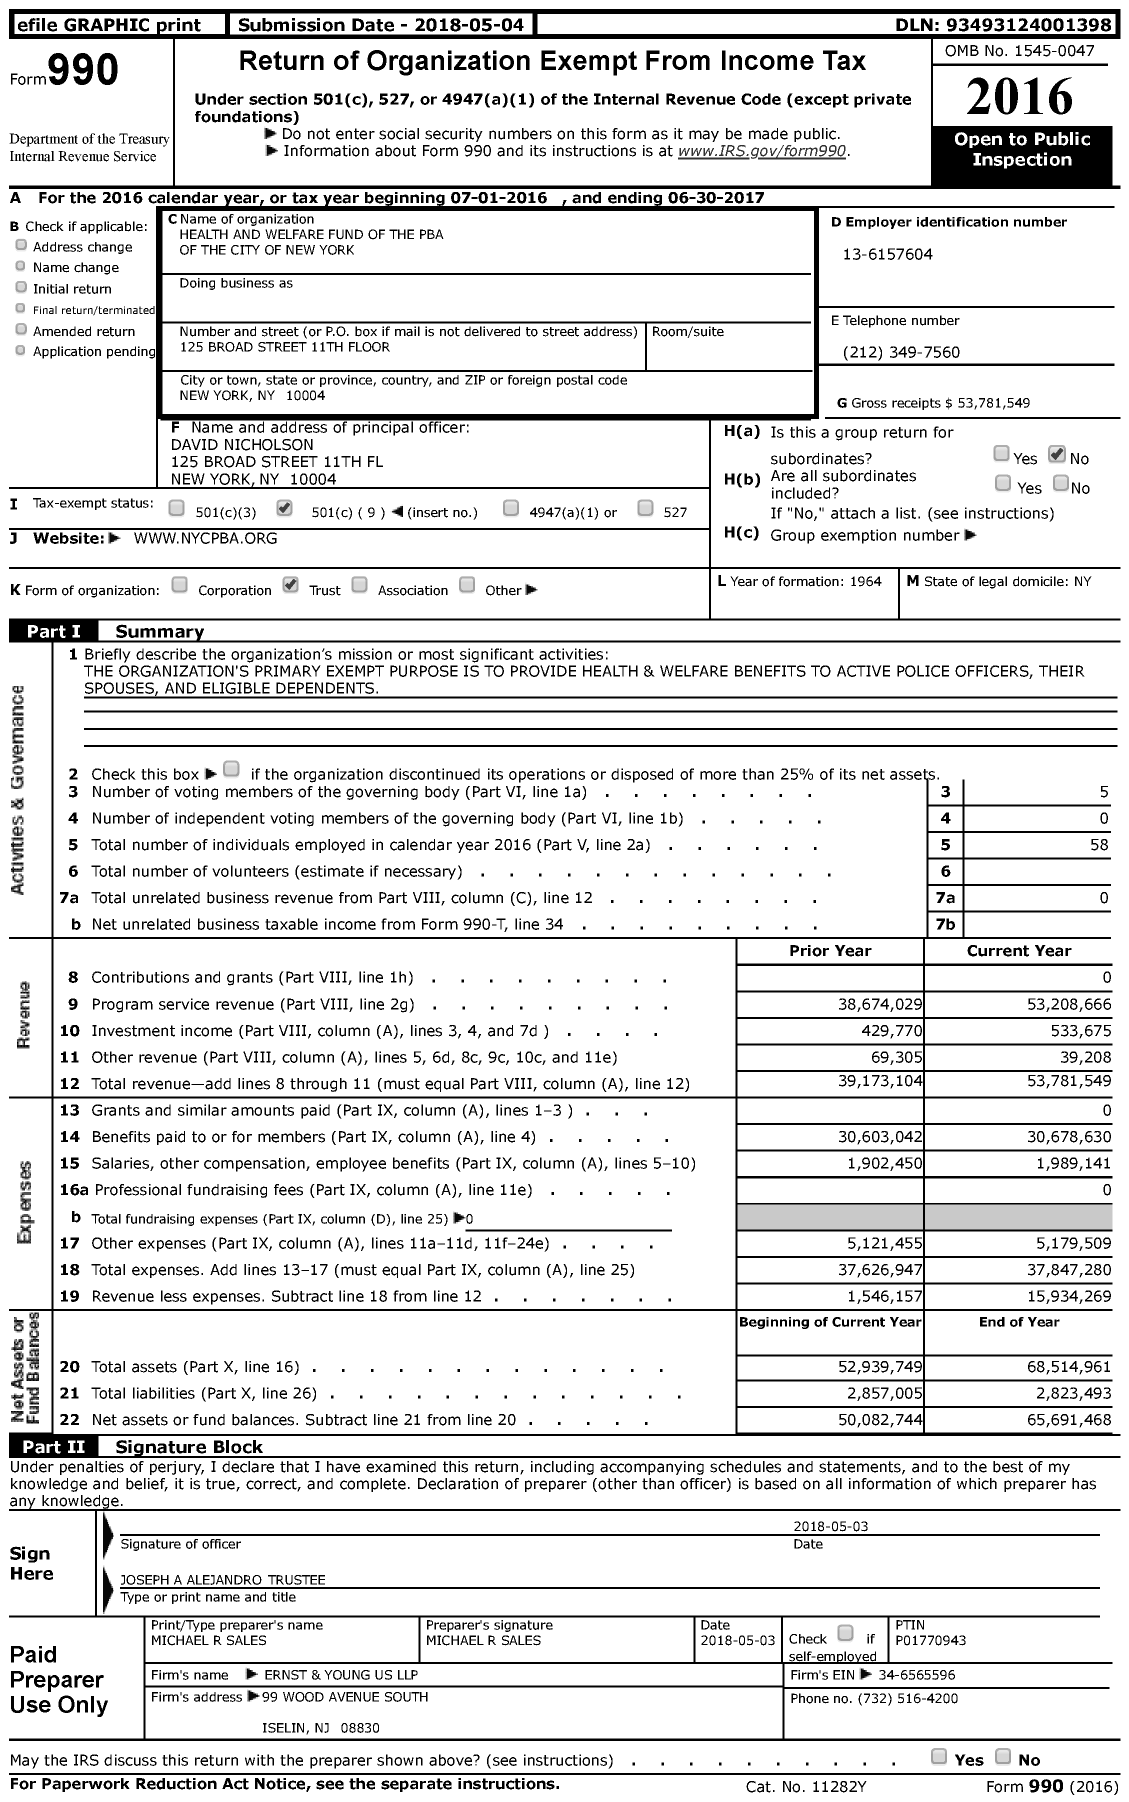 Image of first page of 2016 Form 990 for Health and Welfare Fund of the pba of the city of new york